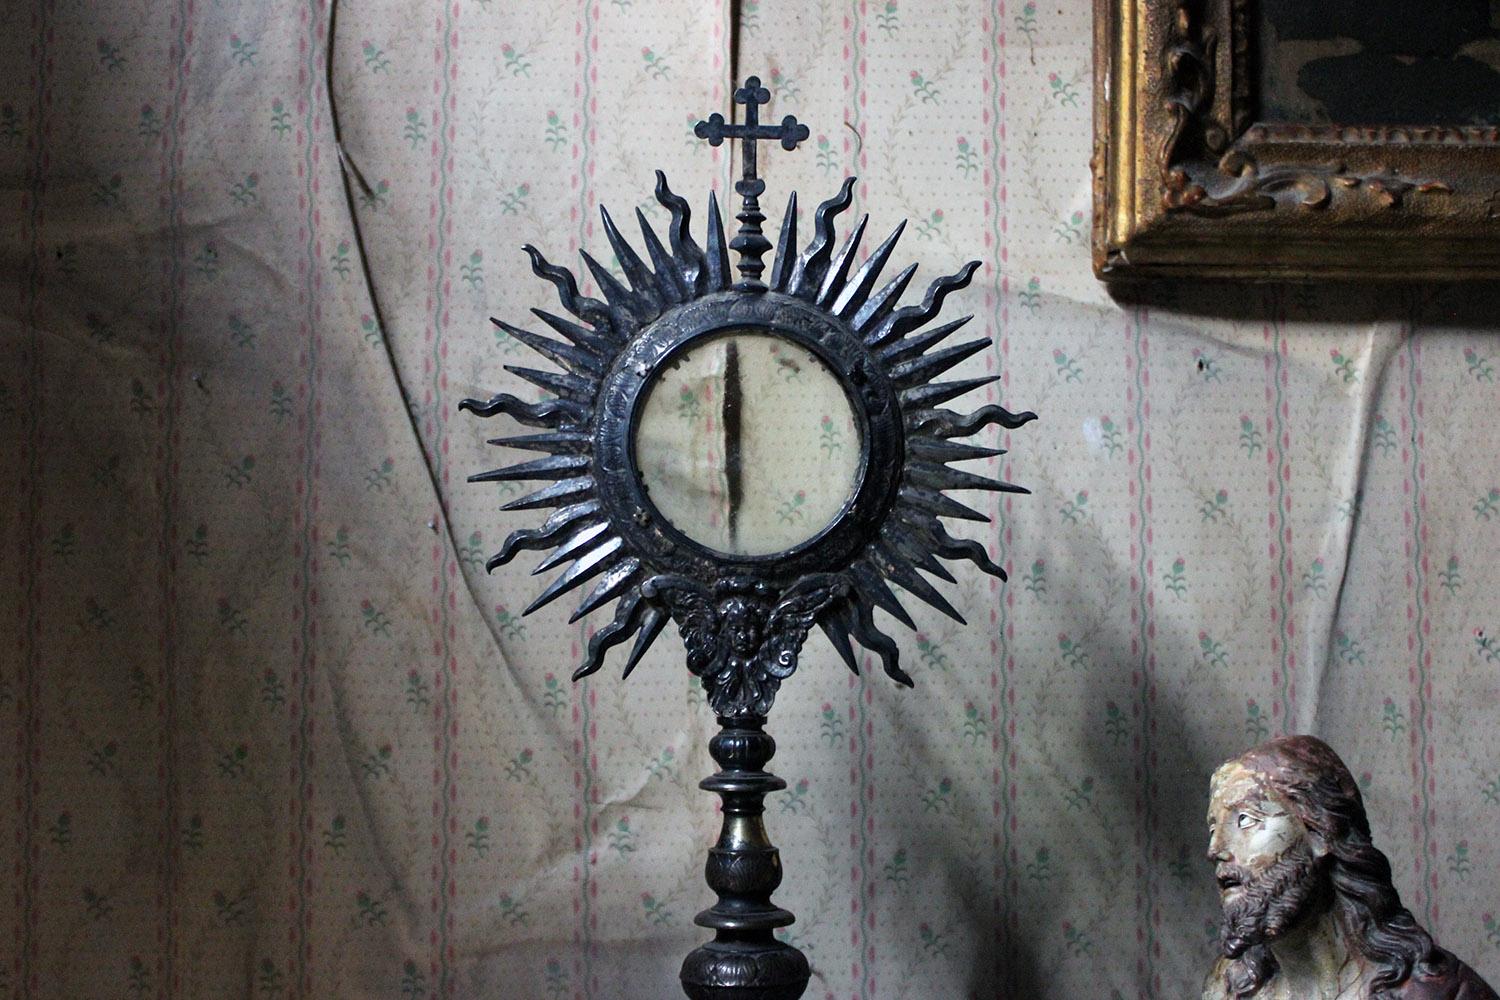 The beautifully crafted ostensory or monstrance, for the display of relics or objects of piety, the upper section as a sunburst with cross finial, the circular glass compartment opening to reveal a vacant interior, over a winged cherub to a turned